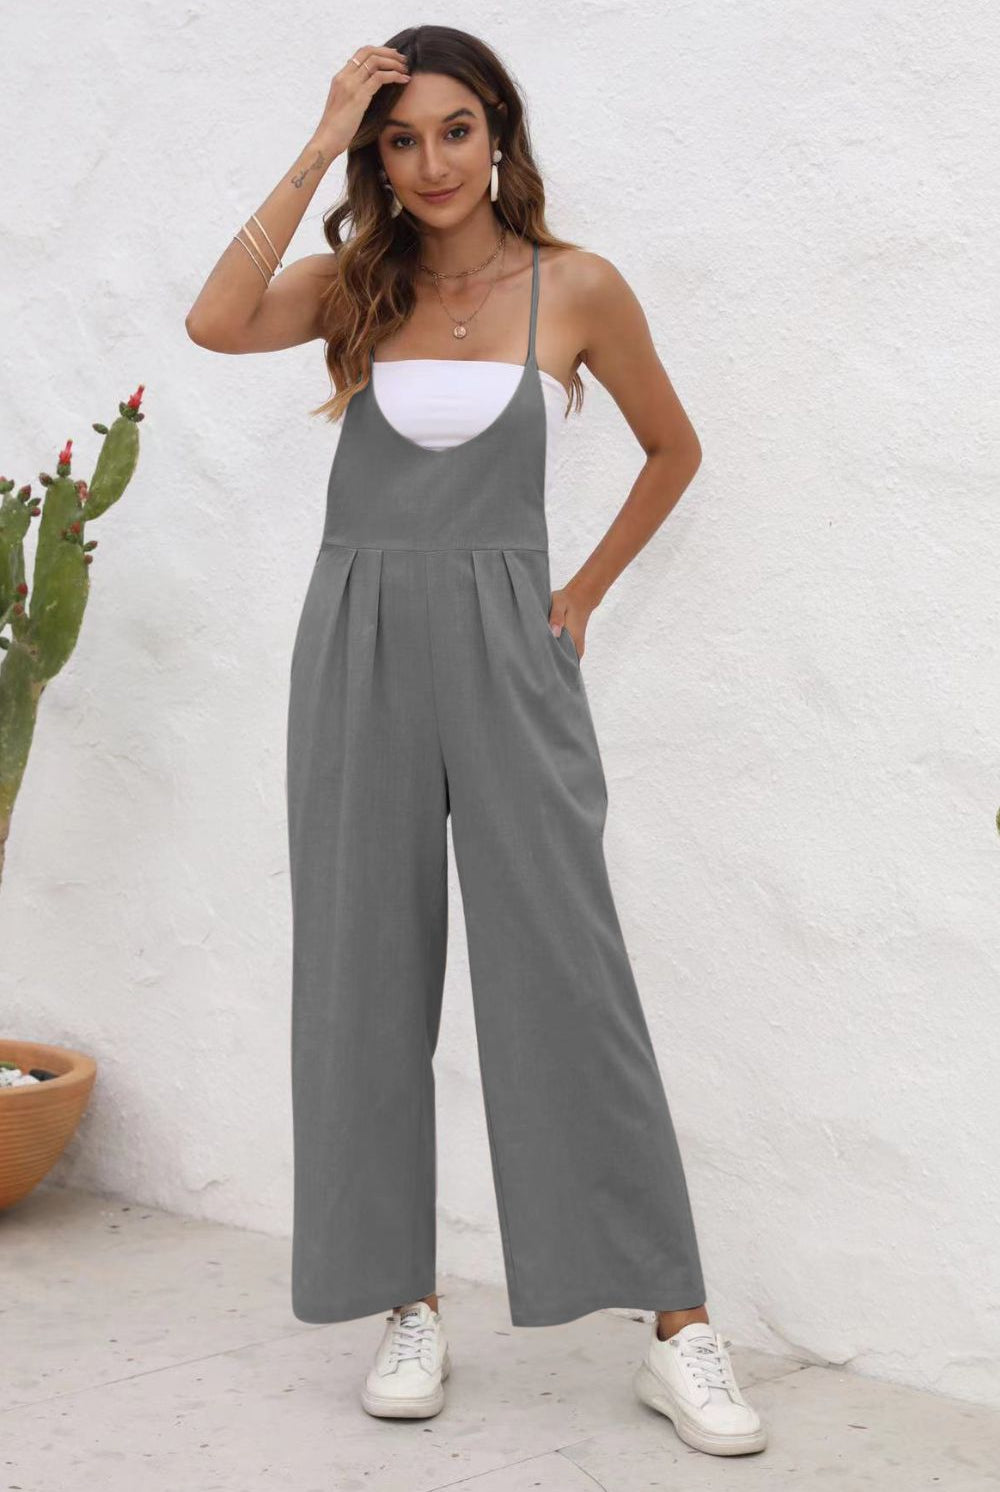 Stylish person posing in a sleeveless wide-leg jumpsuit, perfect for versatile looks.